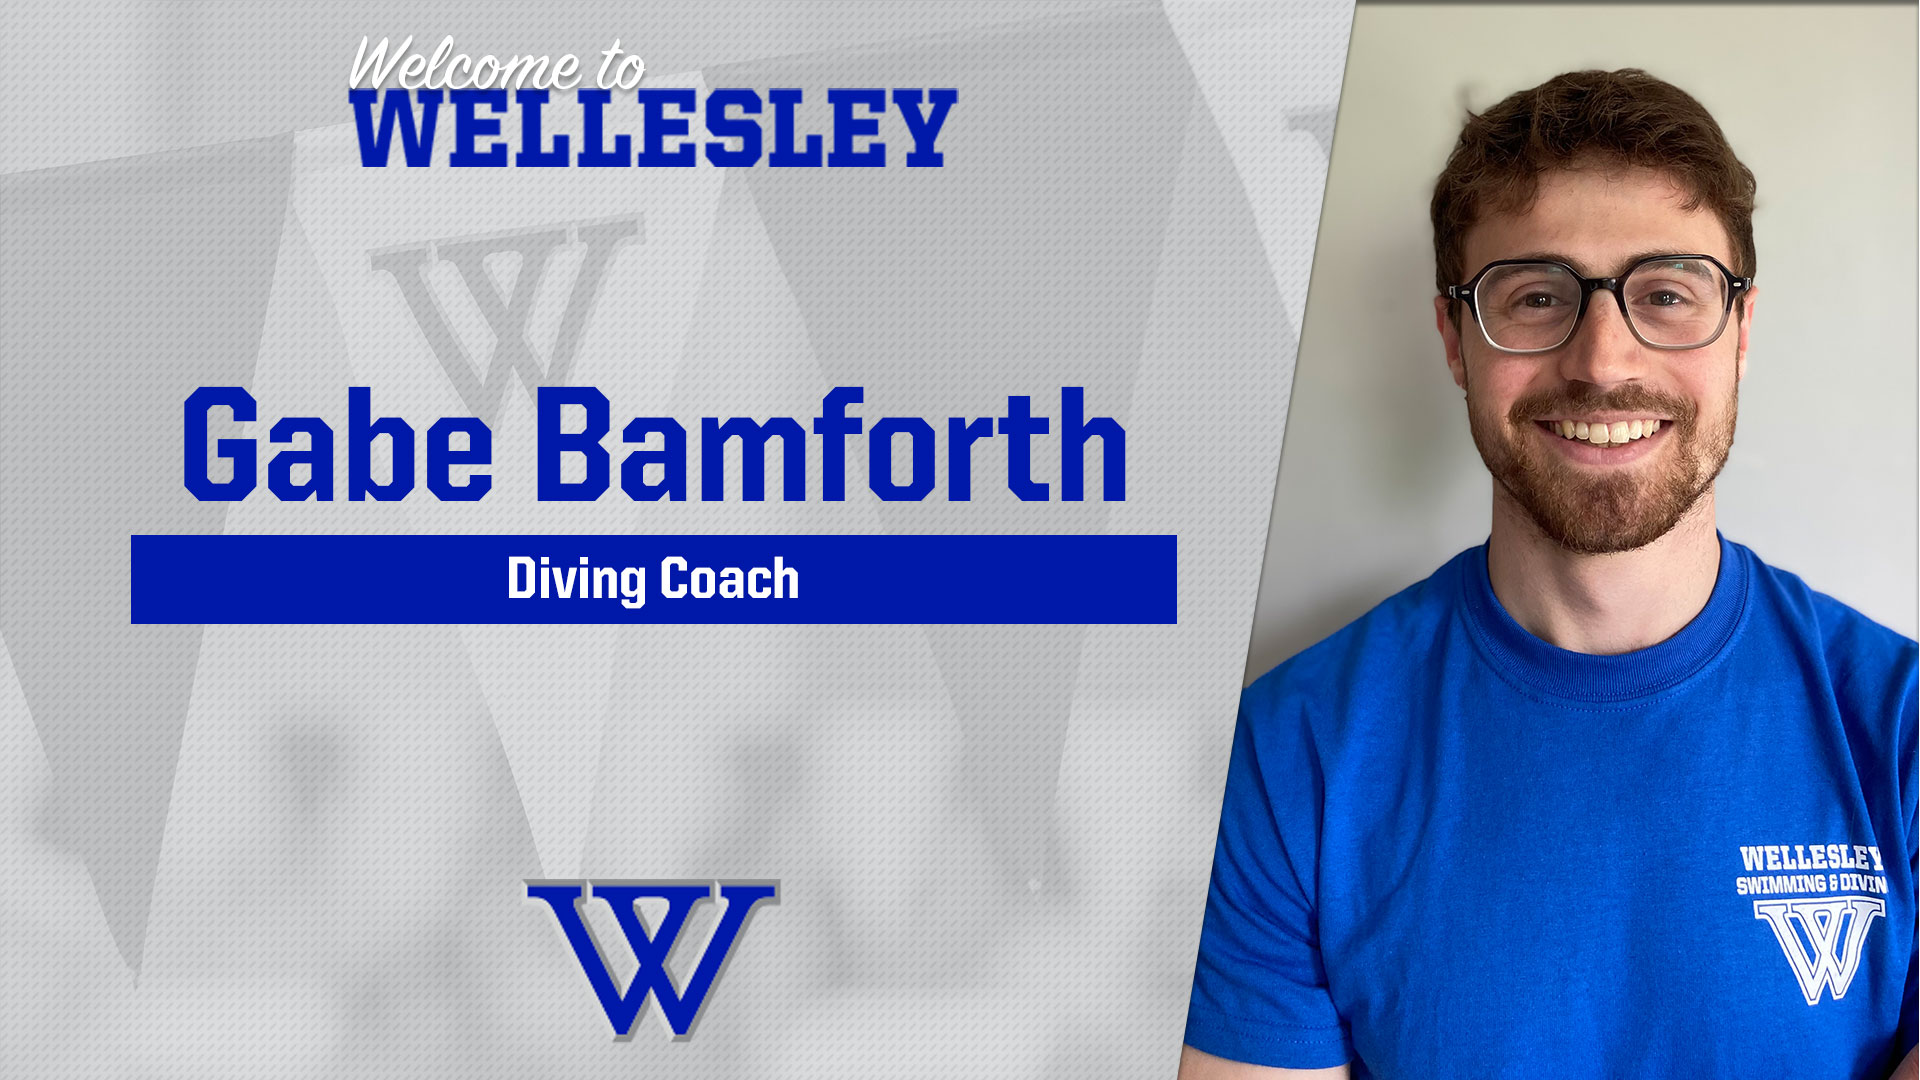 Gabe Bamforth is the new Diving Coach for the Blue.